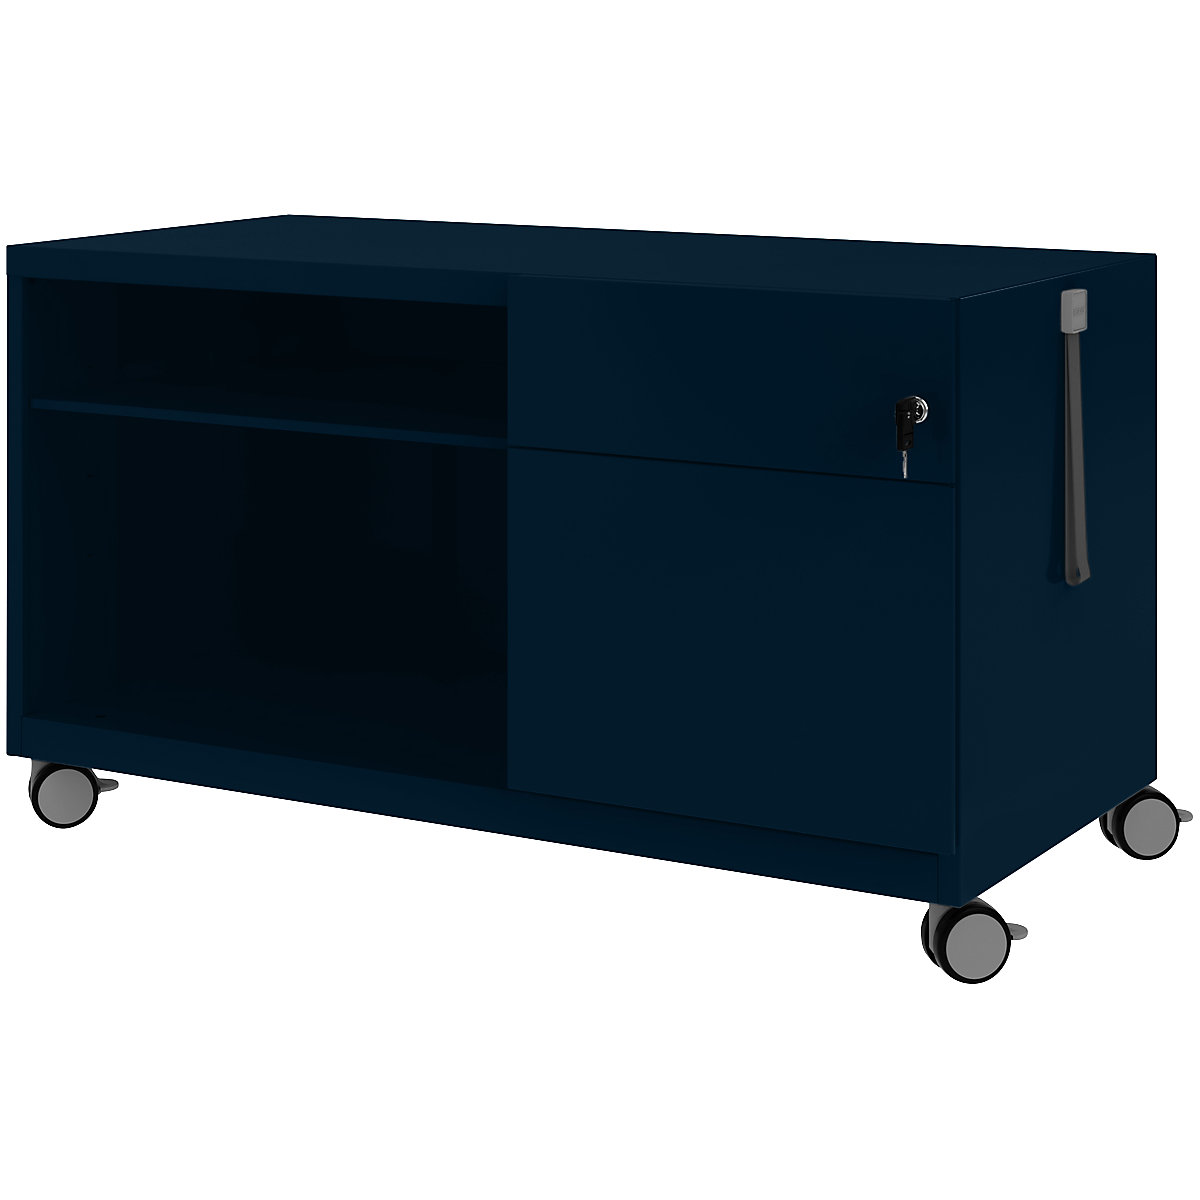 Chariot Note&trade; CADDY, h x l x p 563 x 1000 x 490 mm - BISLEY